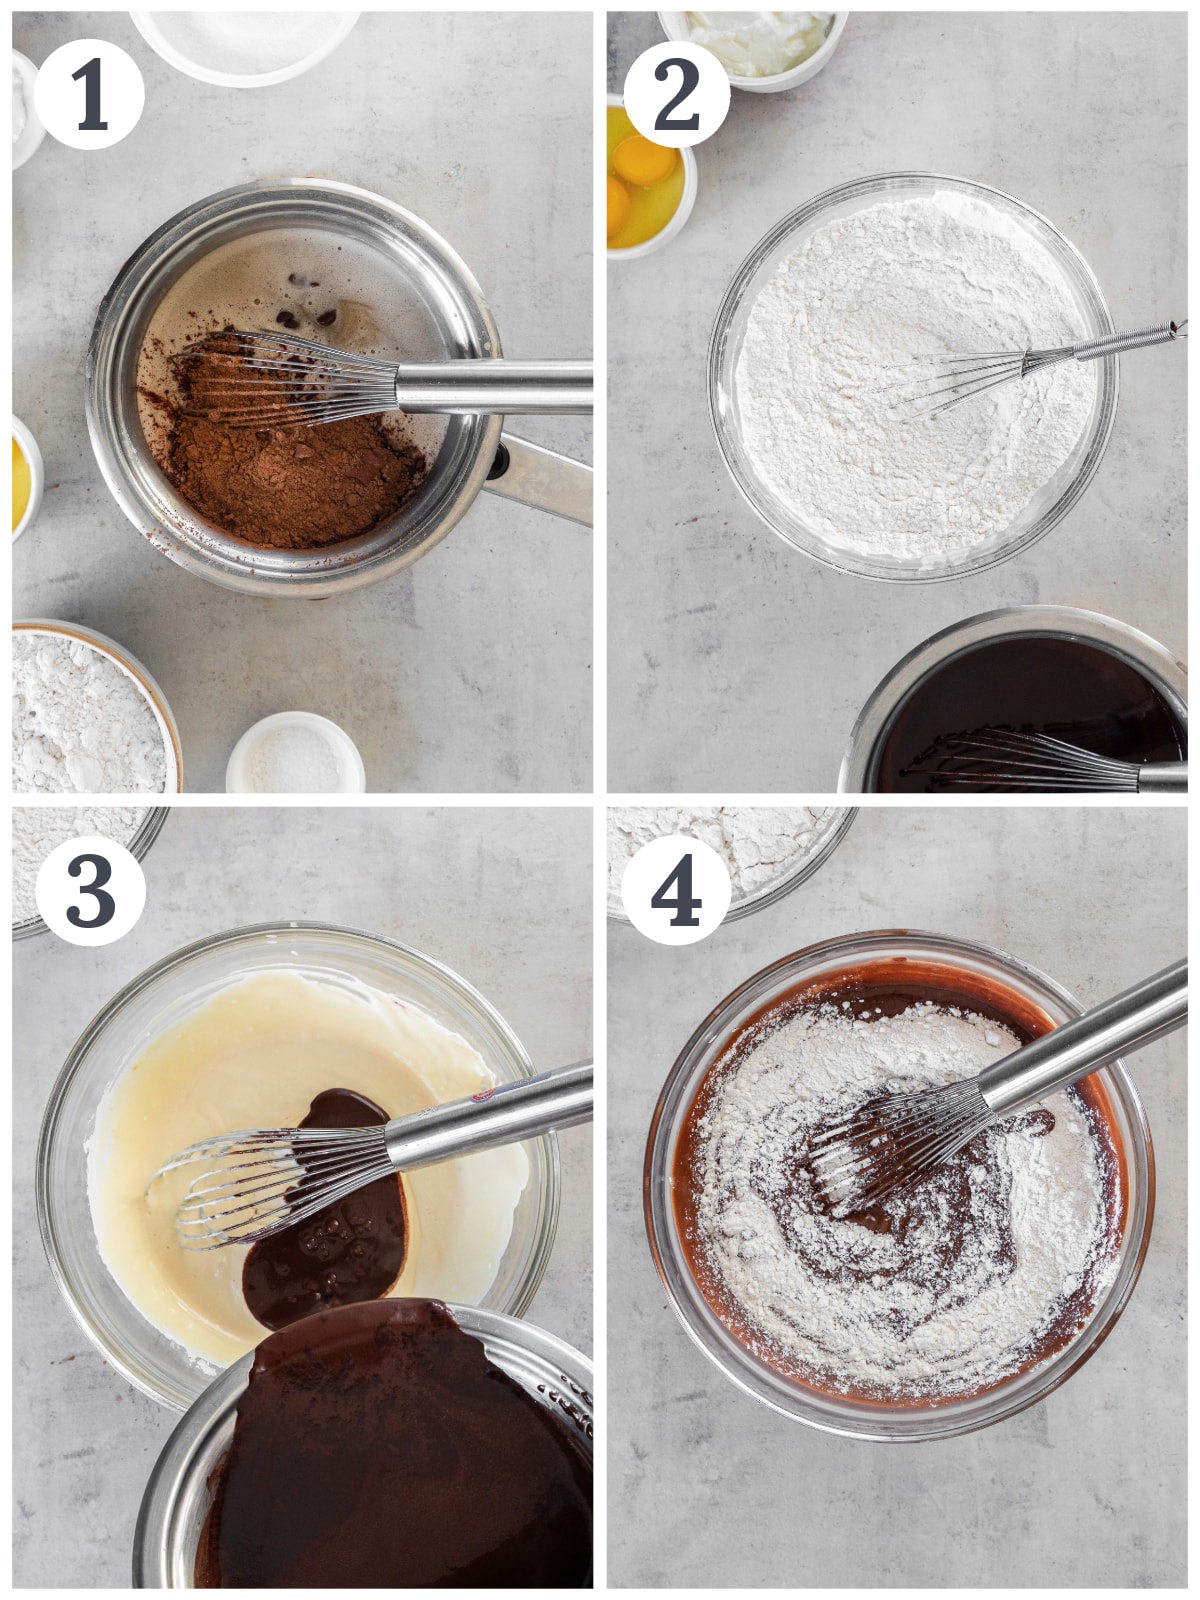 photo collage demonstrating how to make chocolate guinness cake in a mixing bowl and small saucepan to melt chocolate with guinness.